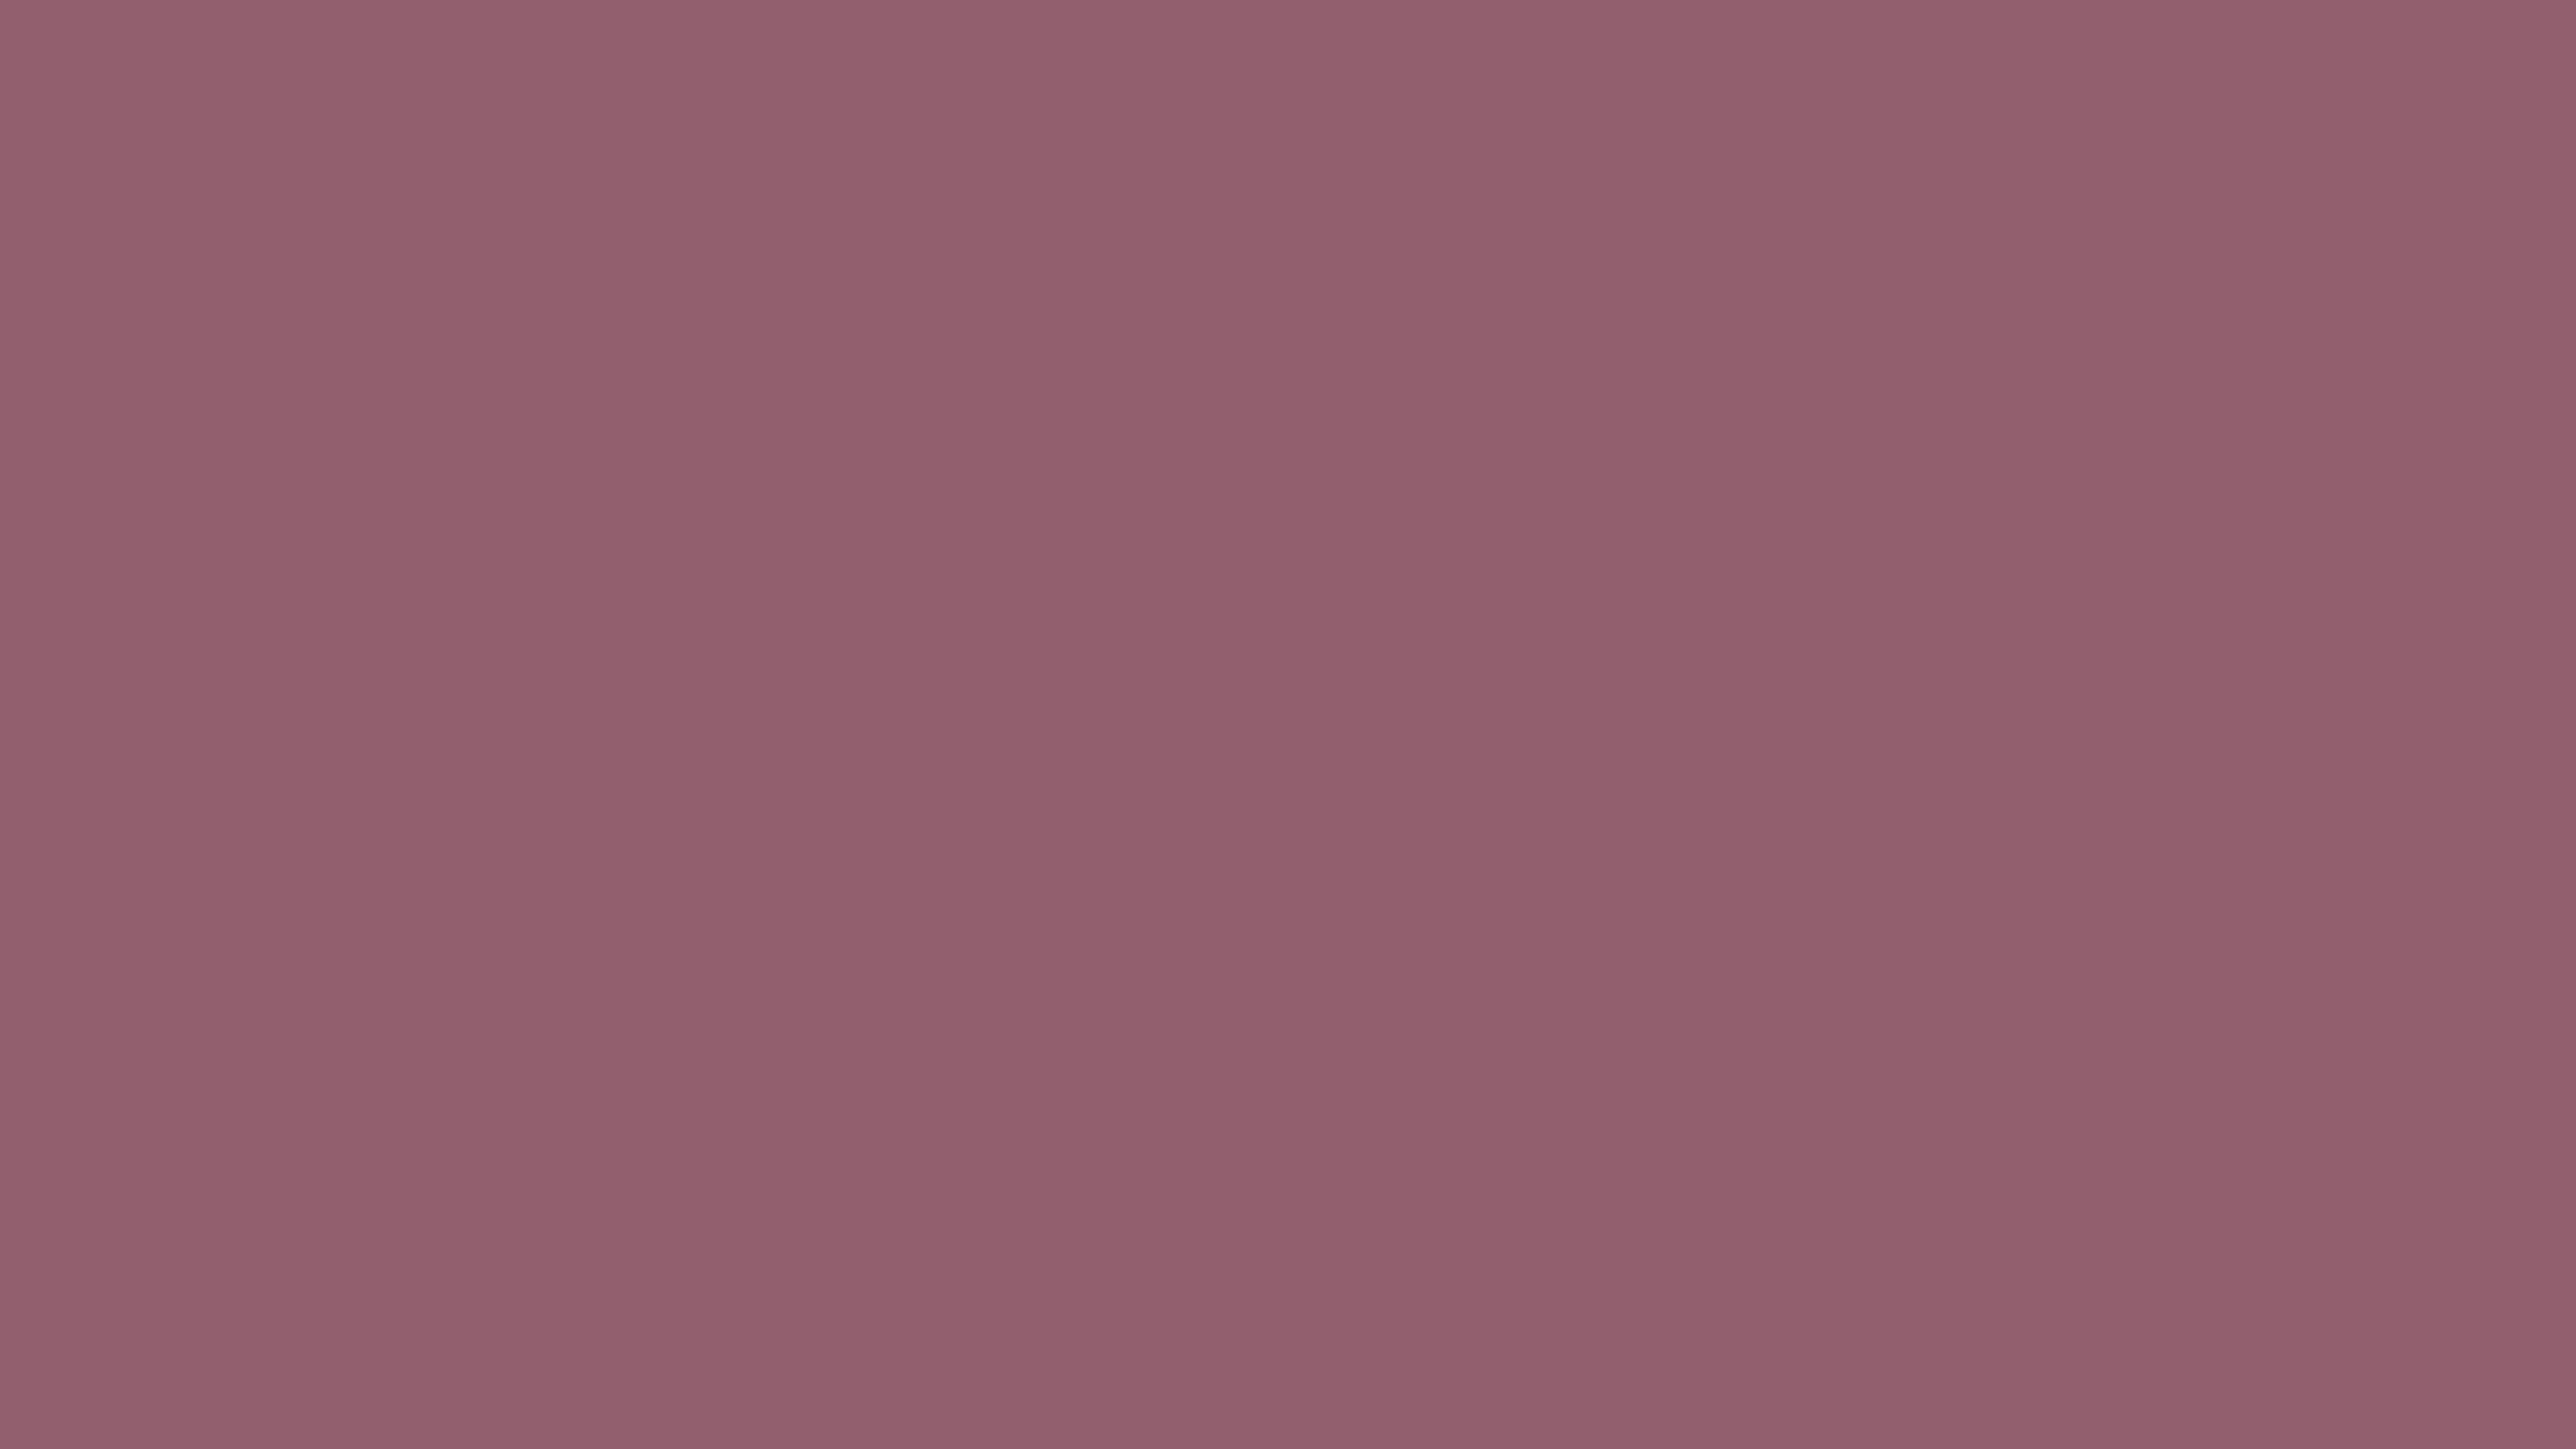 7680x4320 Raspberry Glace Solid Color Background